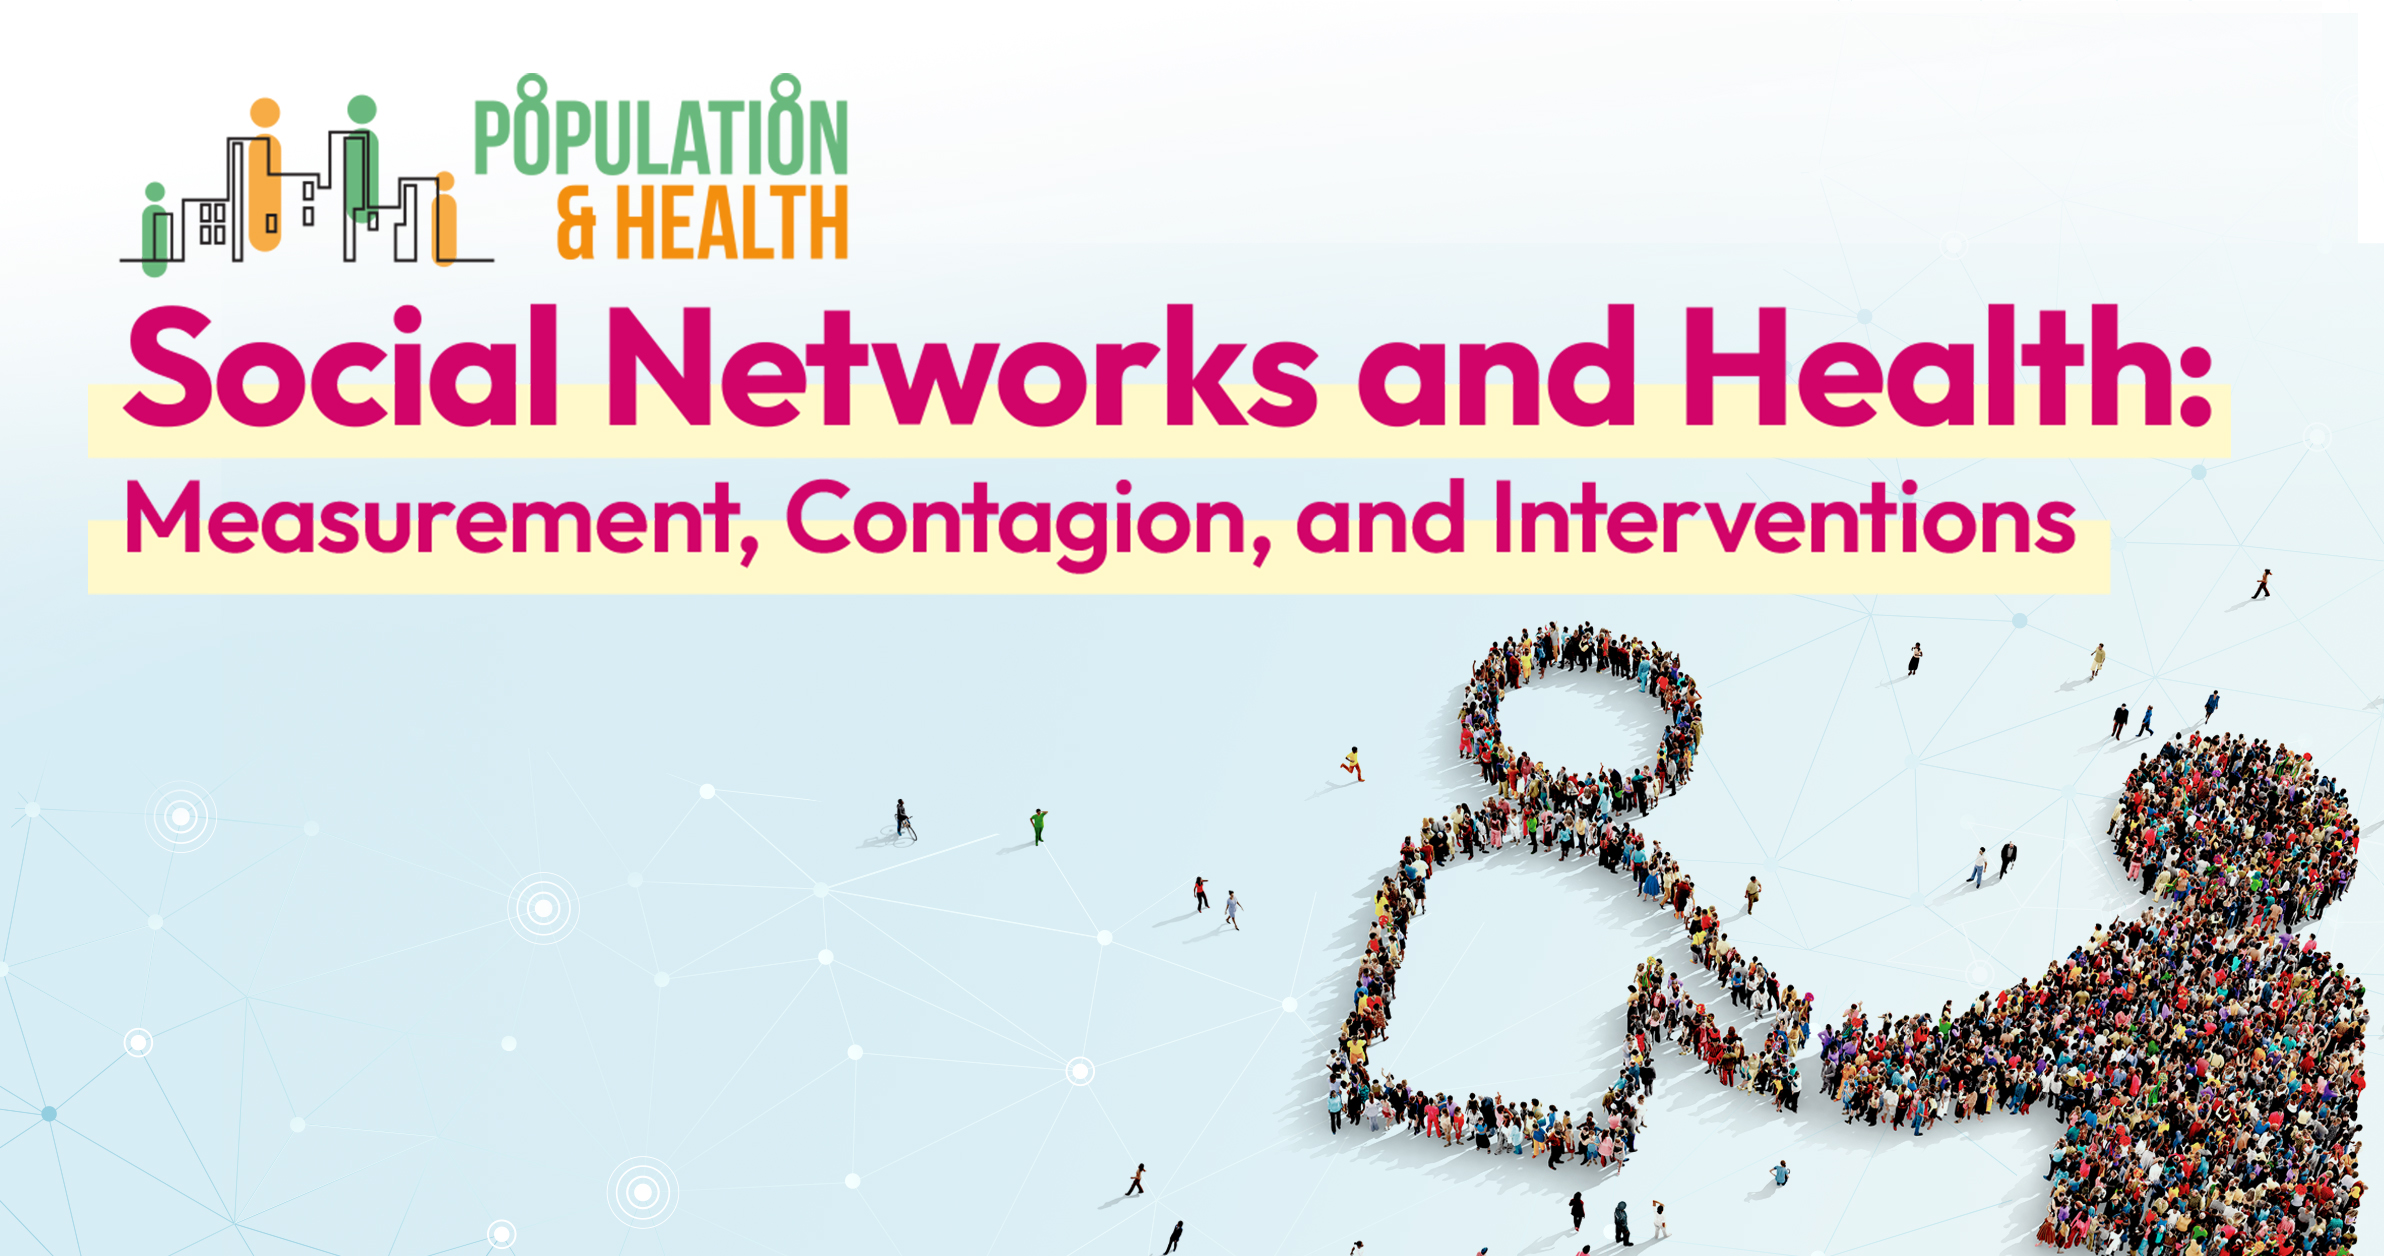 Population & Health Seminar: Social Networks and Health: Measurement, Contagion, and Interventions